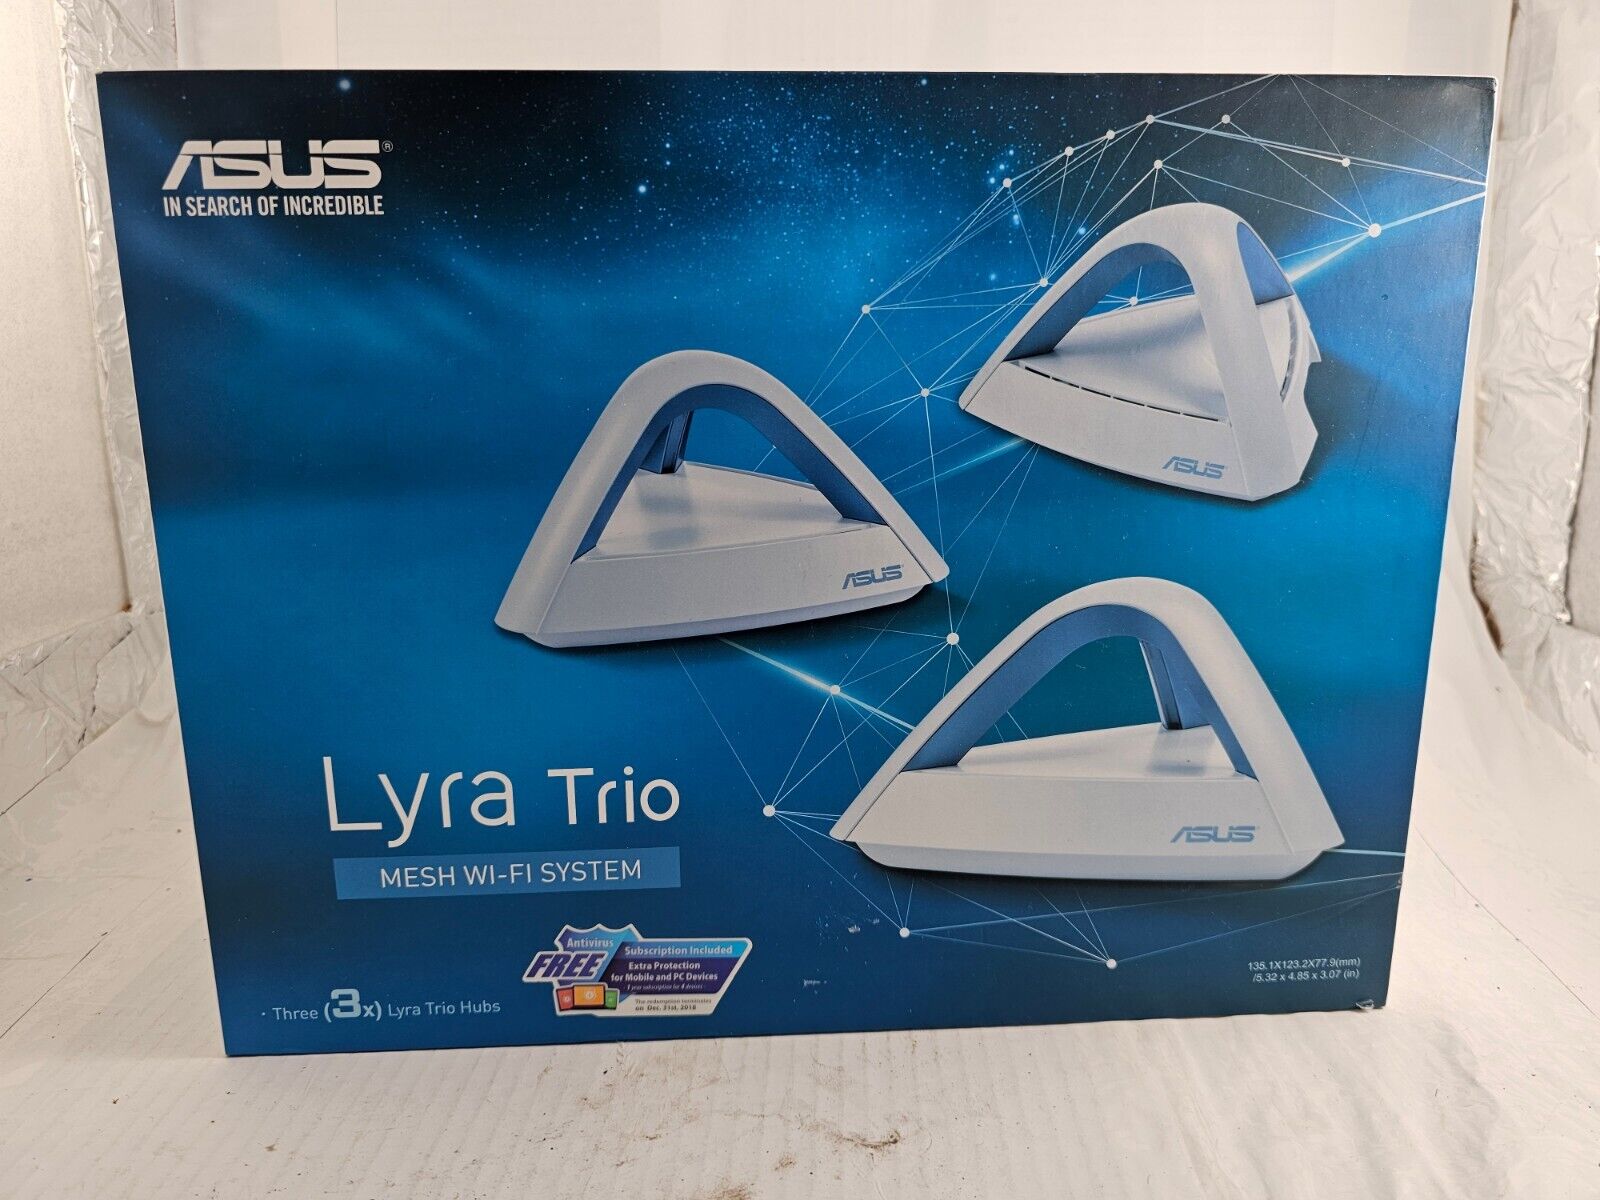 ASUS AC1750 Mesh WiFi System (Lyra Trio 3PK)  Whole Home Coverage up to 5,400